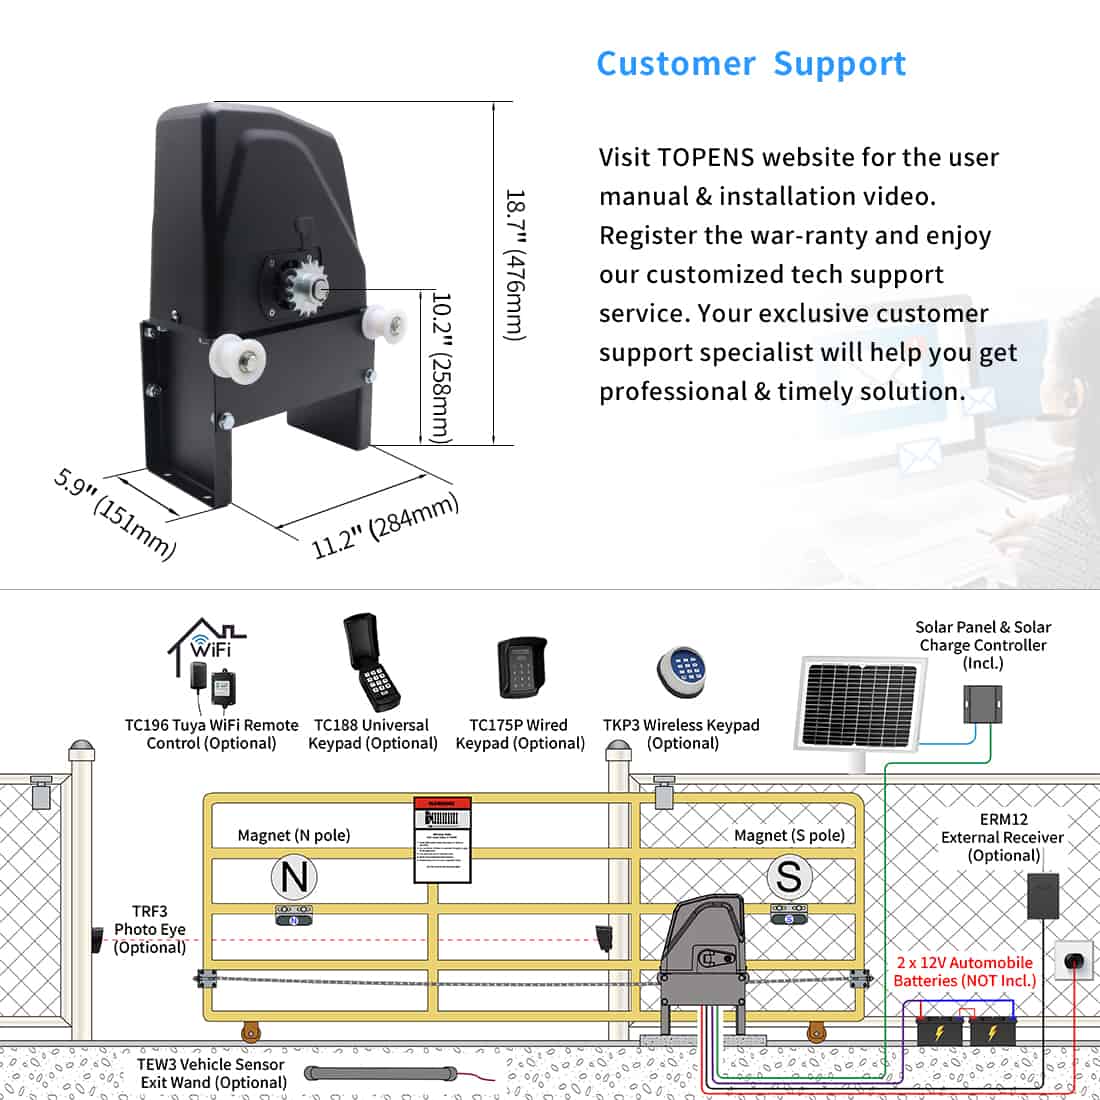 DKC1100S Solar Power Chain Driven Sliding Gate Opener Dimension and Installation Overview